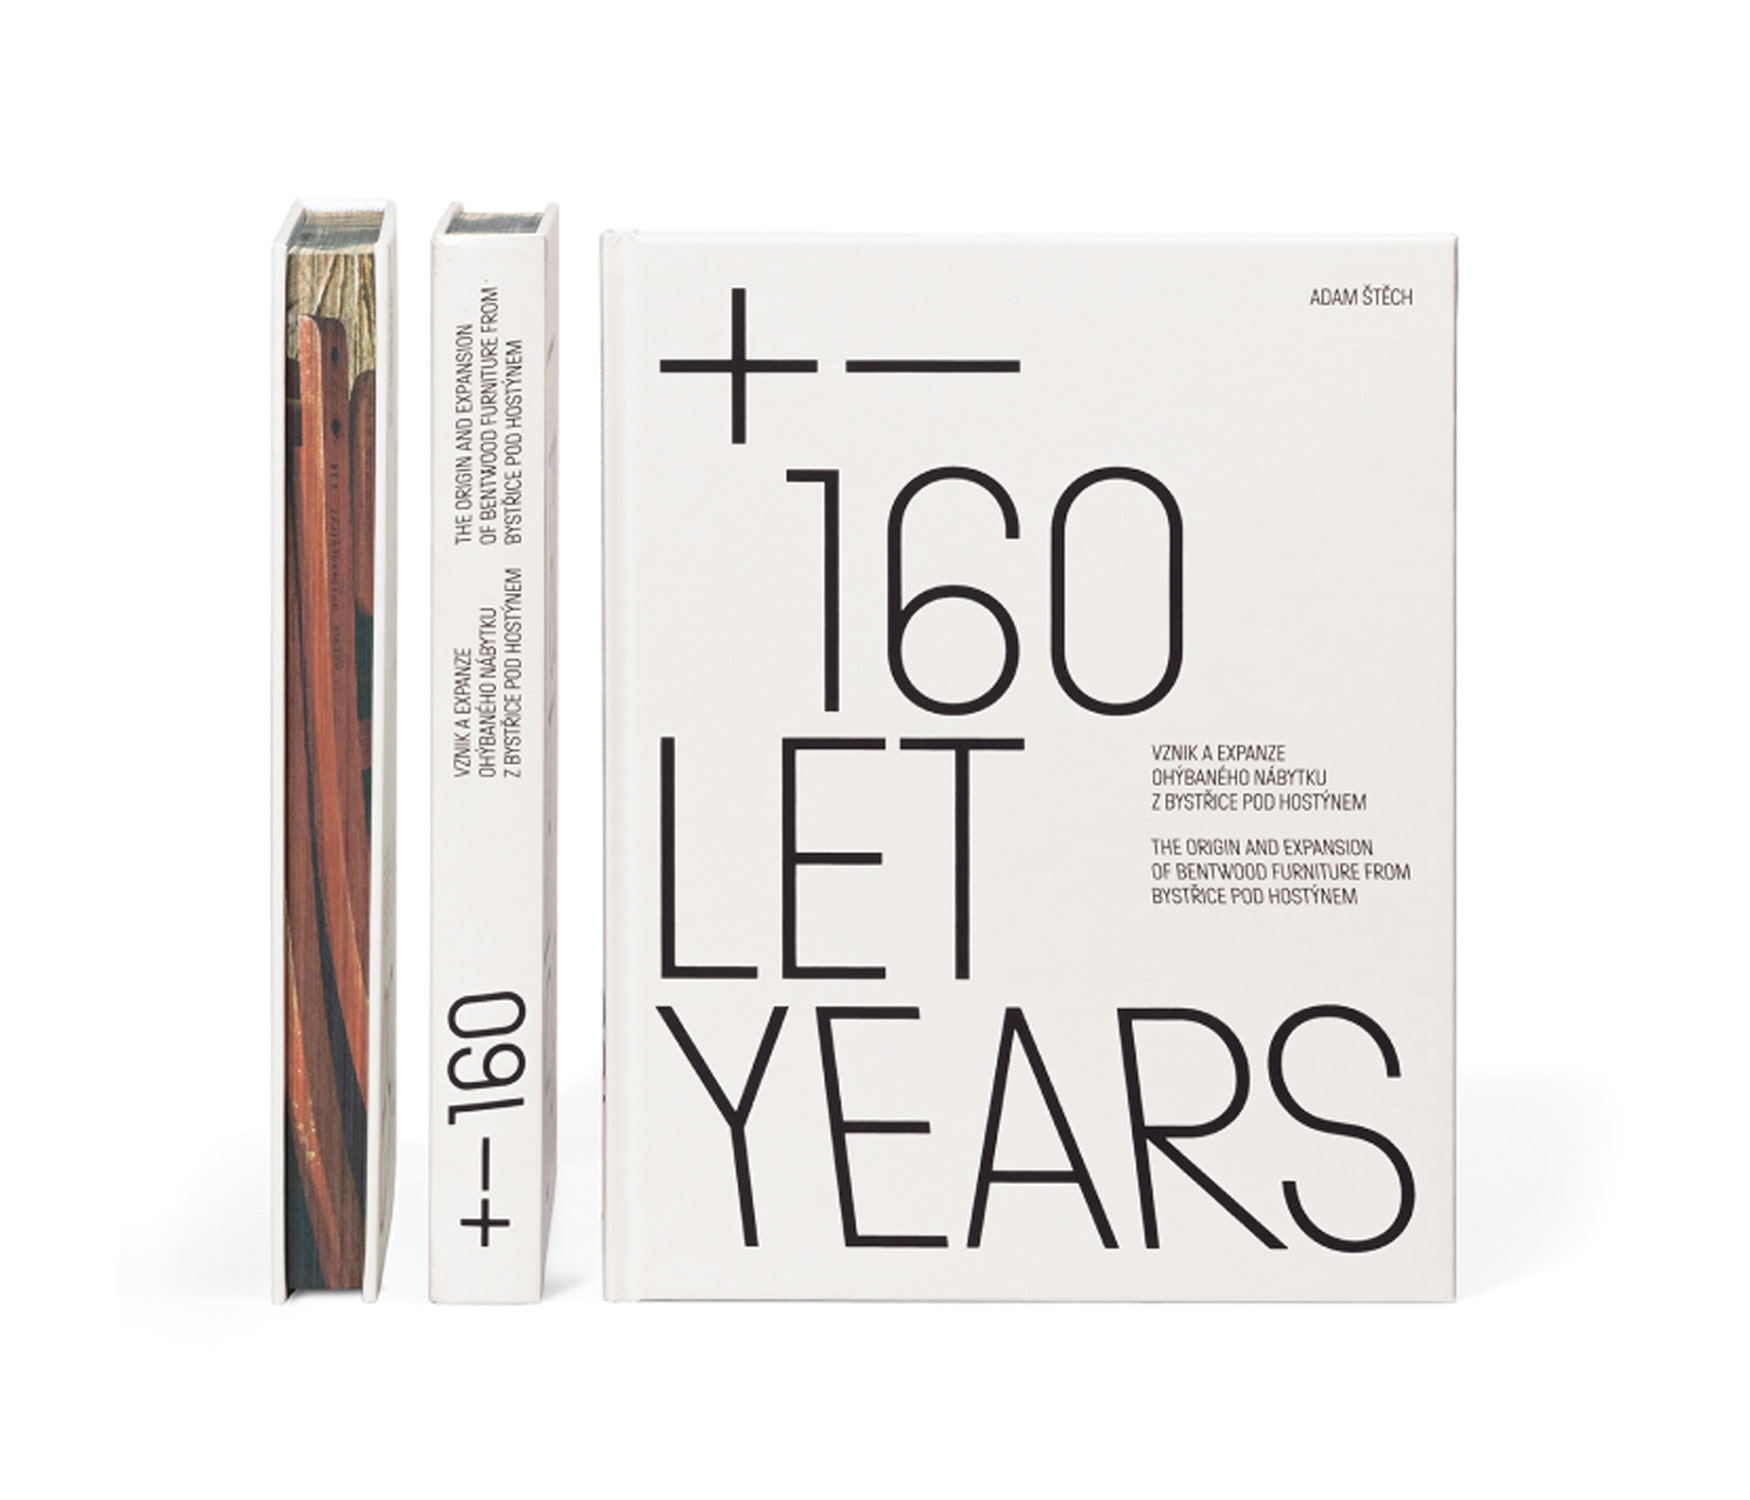 The book + - 160 years - TON